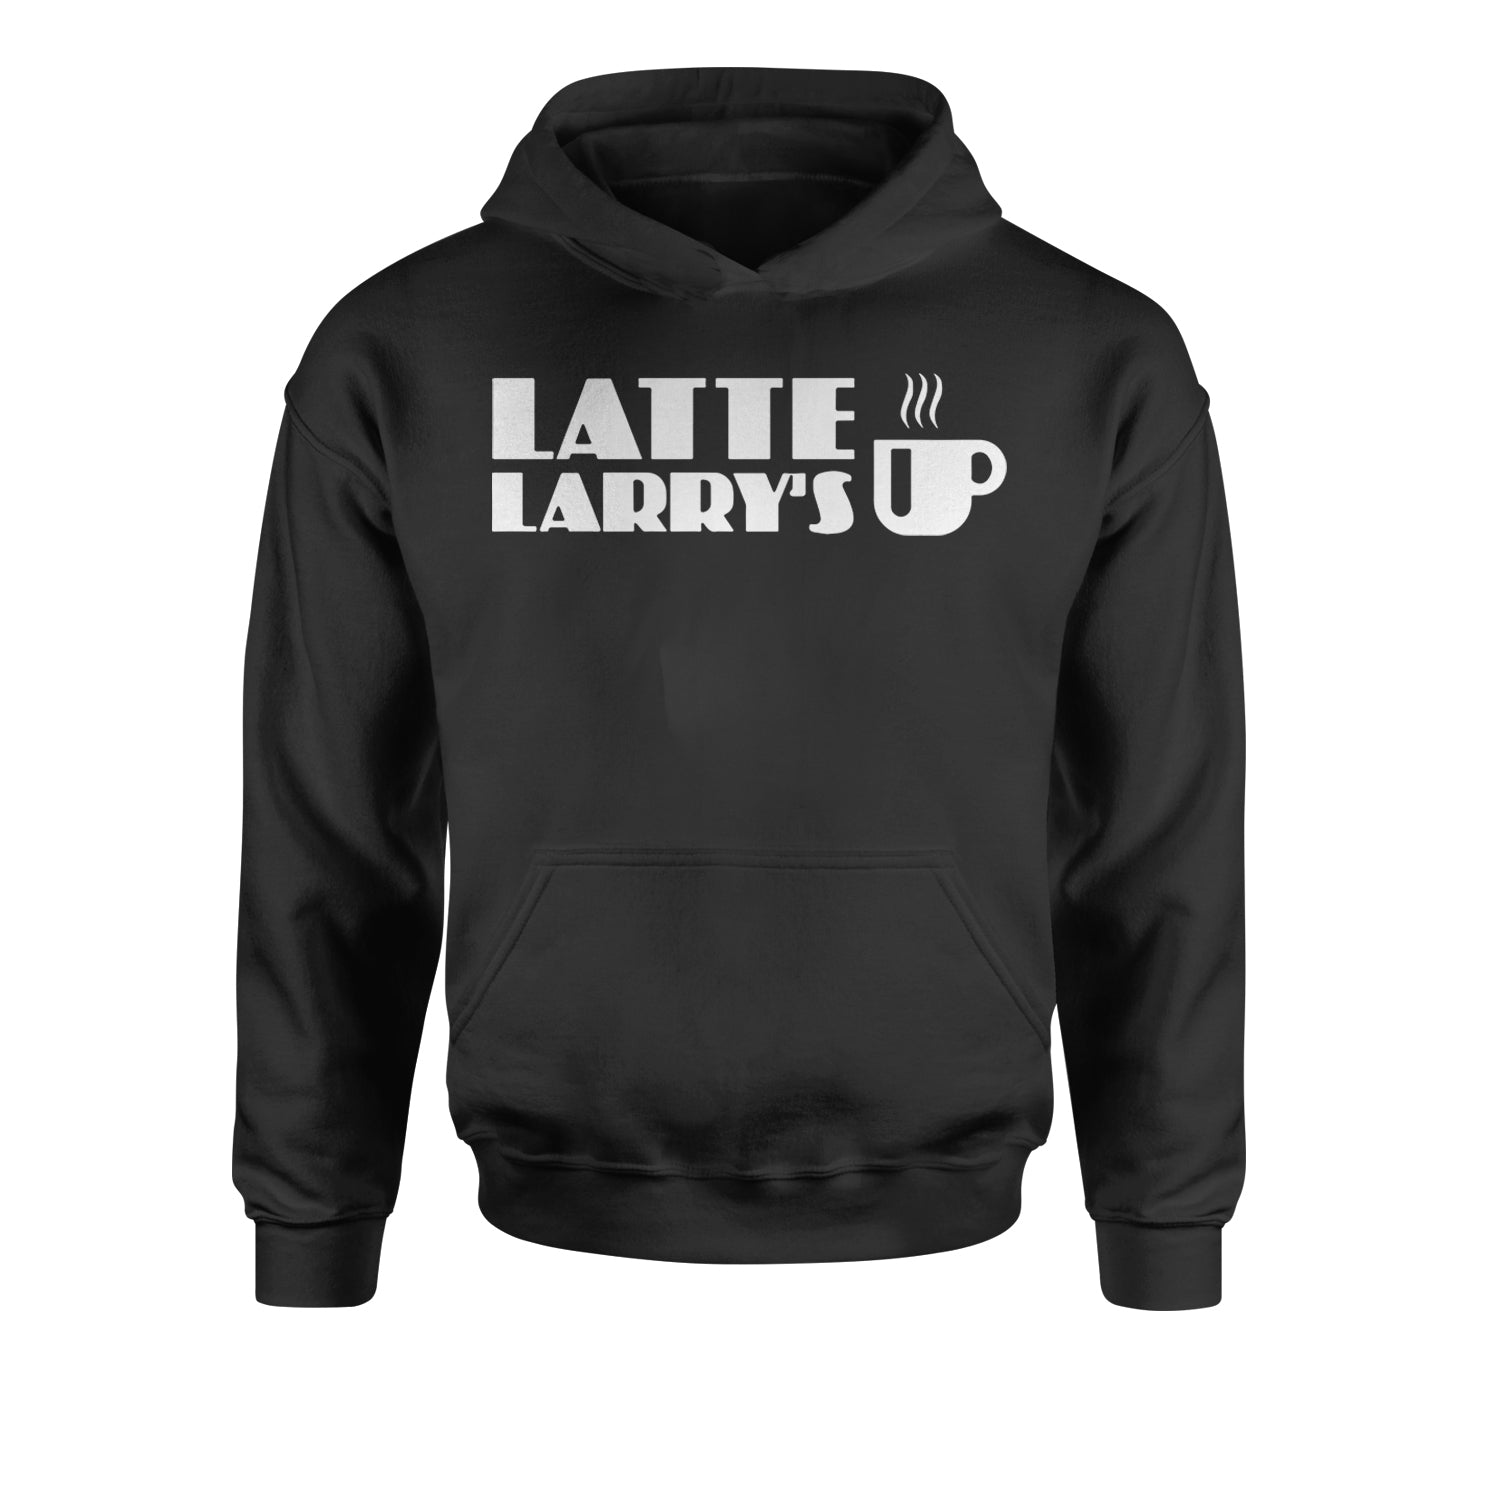 Latte Larry's Enthusiastic Coffee Youth-Sized Hoodie